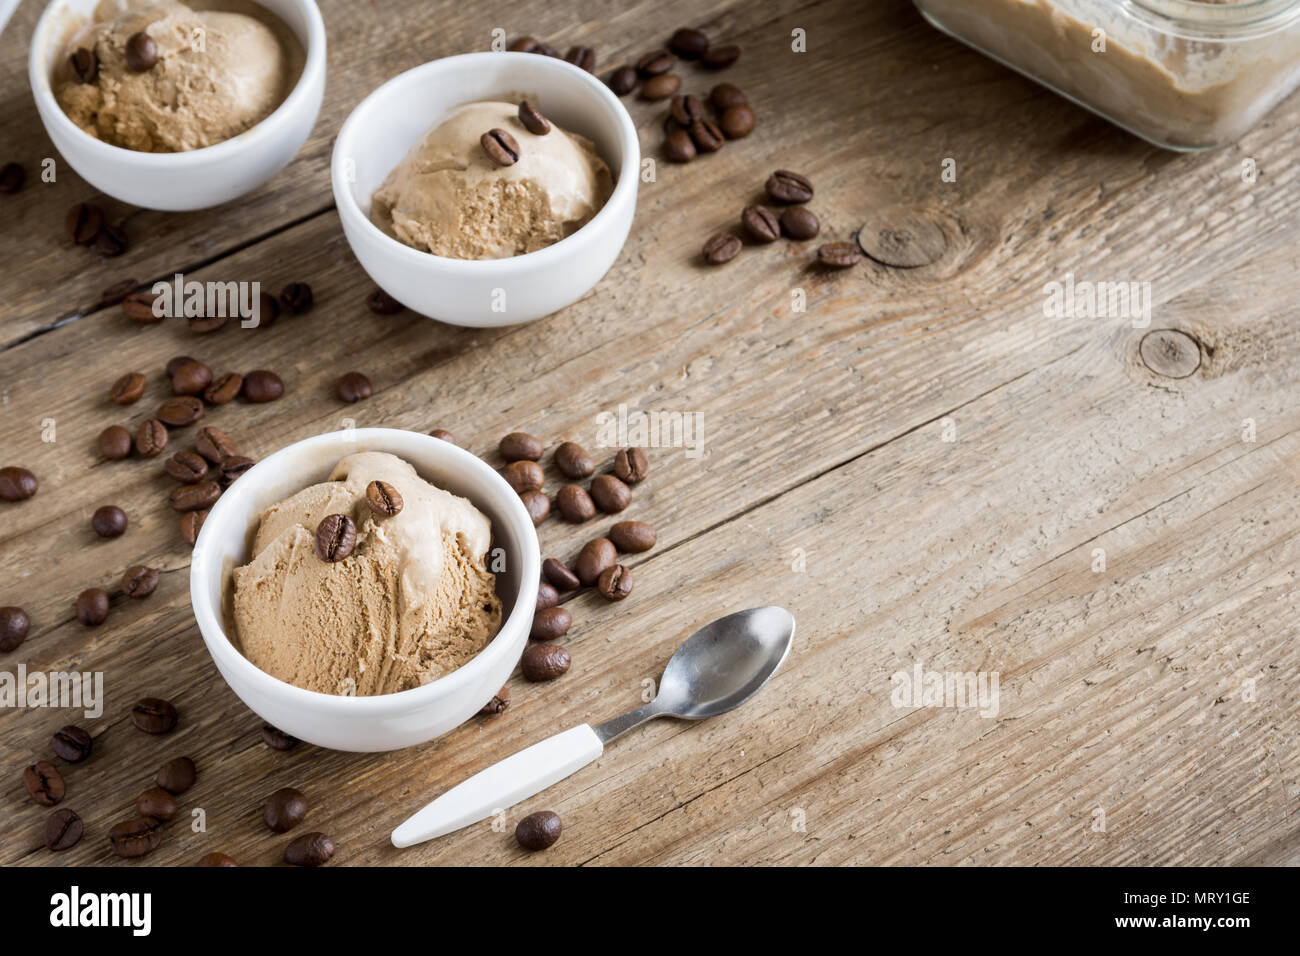 Coffee ice cream on wooden background, top view. Frozen coffee gelato ice cream with coffee beans and cinnamon - healthy summer dessert. Stock Photo